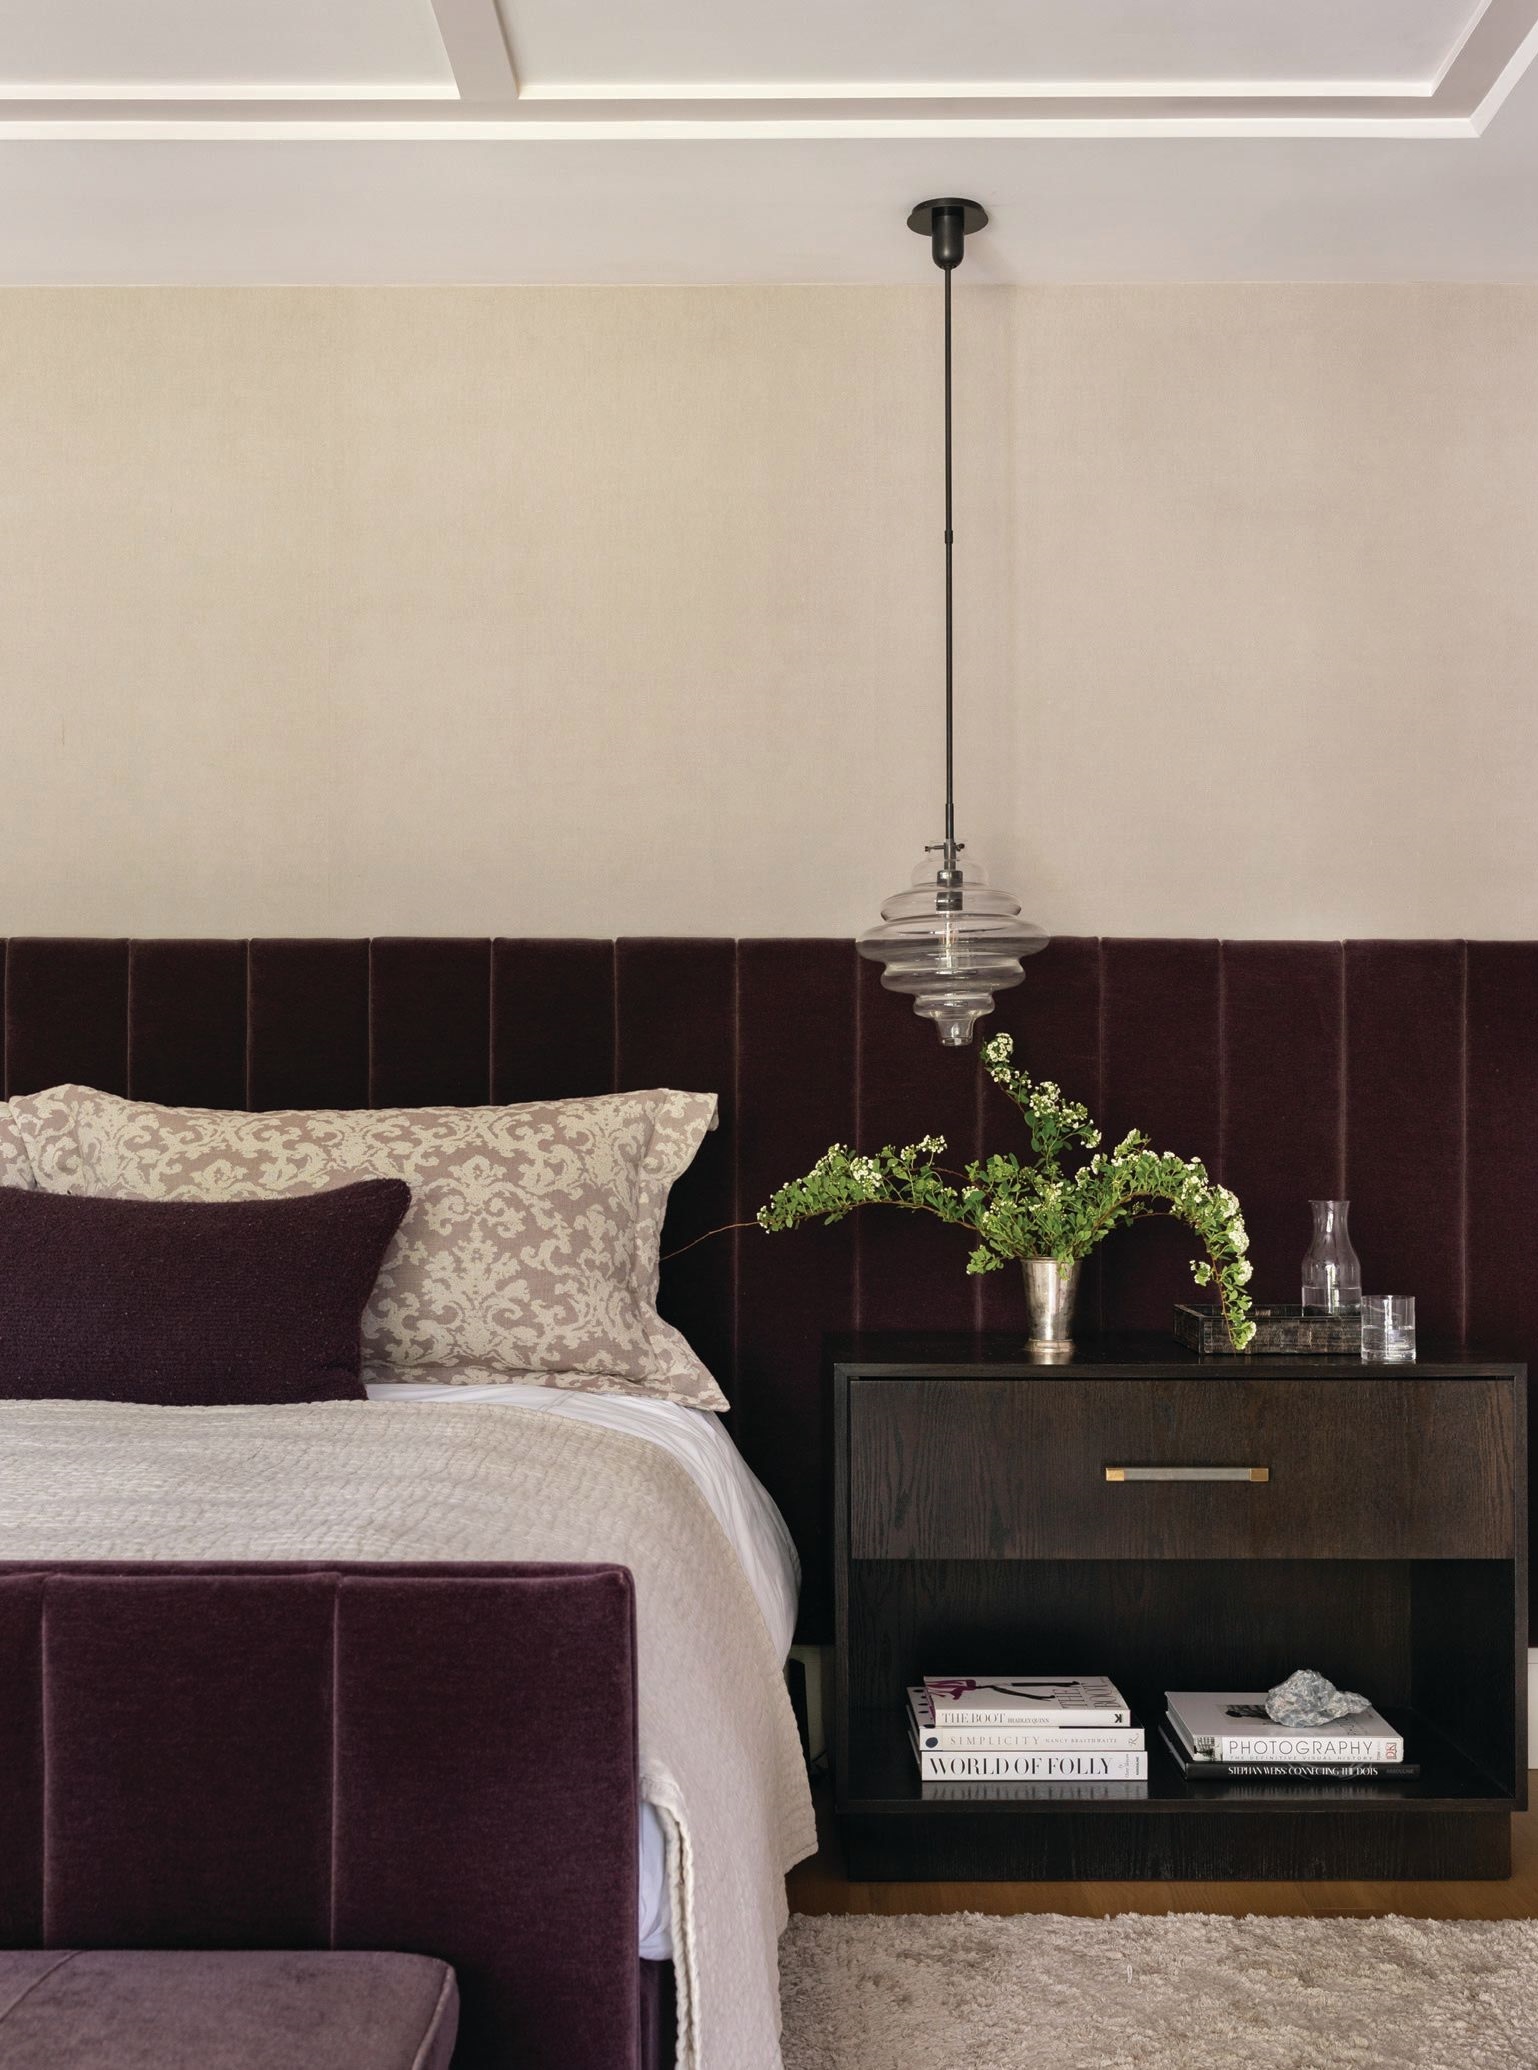 Kelly Wearstler Tableau pendant lights from Visual Comfort add a chic accent to the primary bedroom, which also features Schumacher San Carlo Mohair Velvet for added texture. Photographed by Aimée Mazzenga